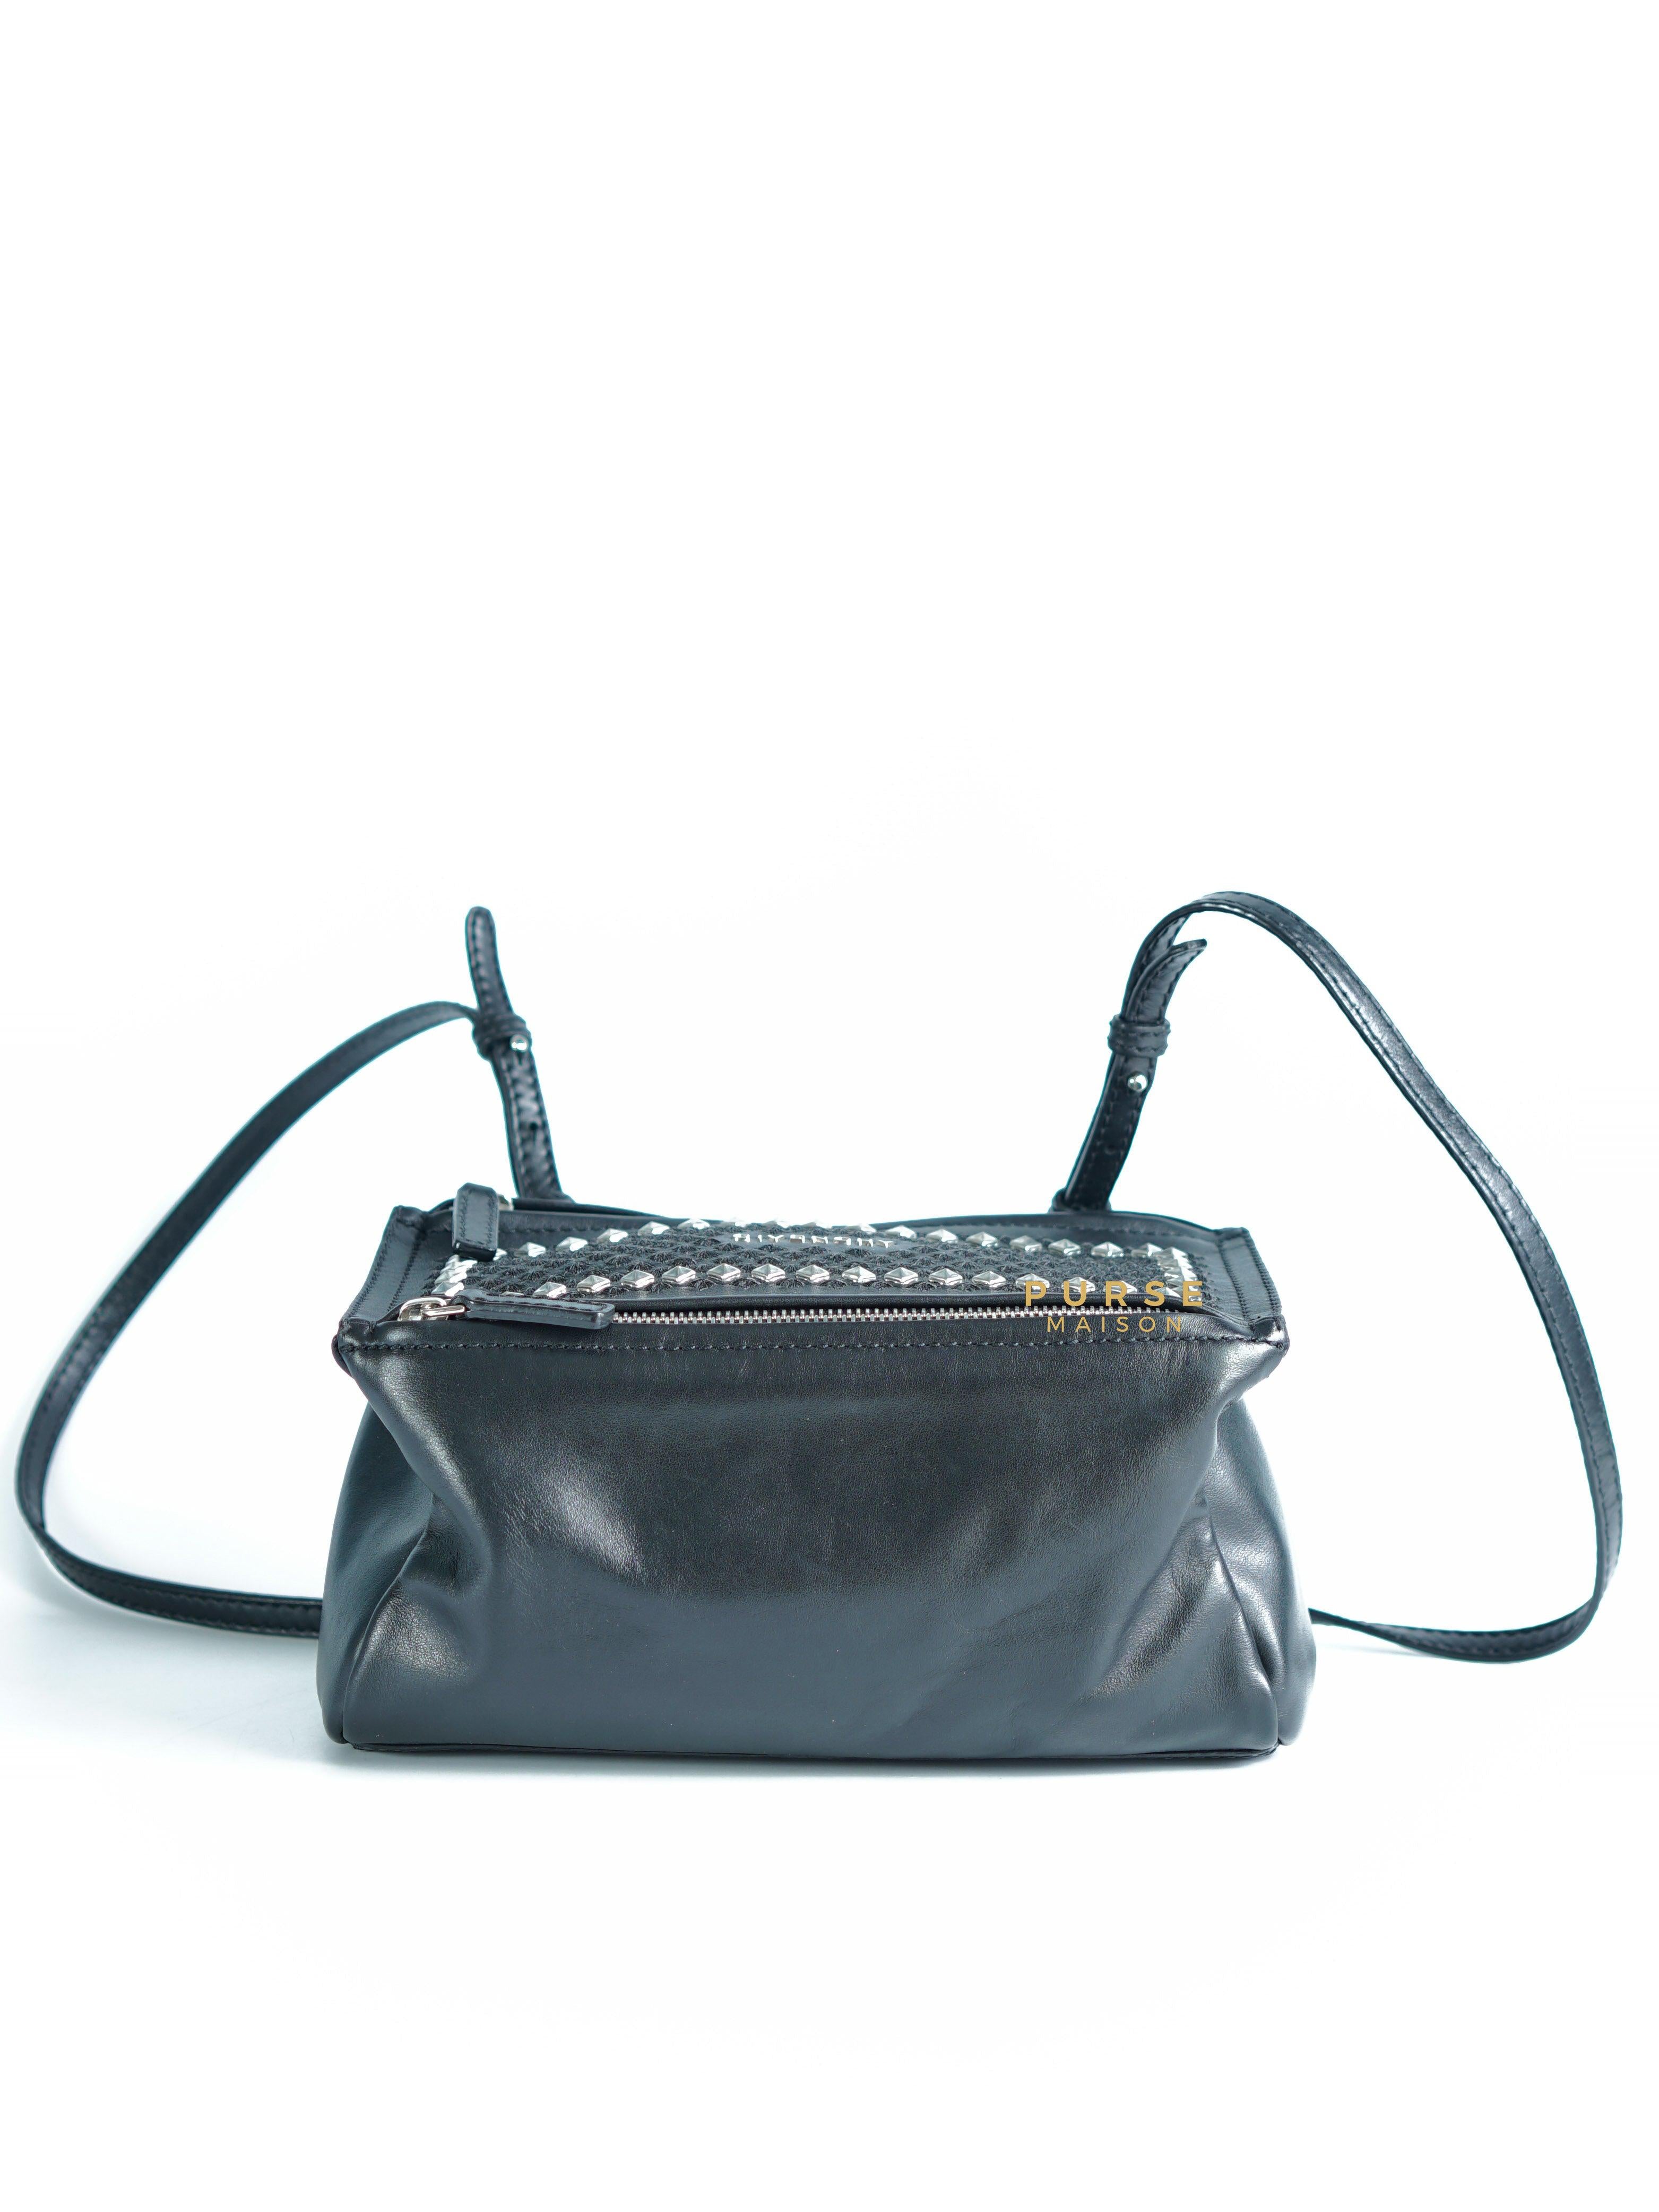 Givenchy Mini Pandora Studded Black Bag in Smooth Leather | Purse Maison Luxury Bags Shop